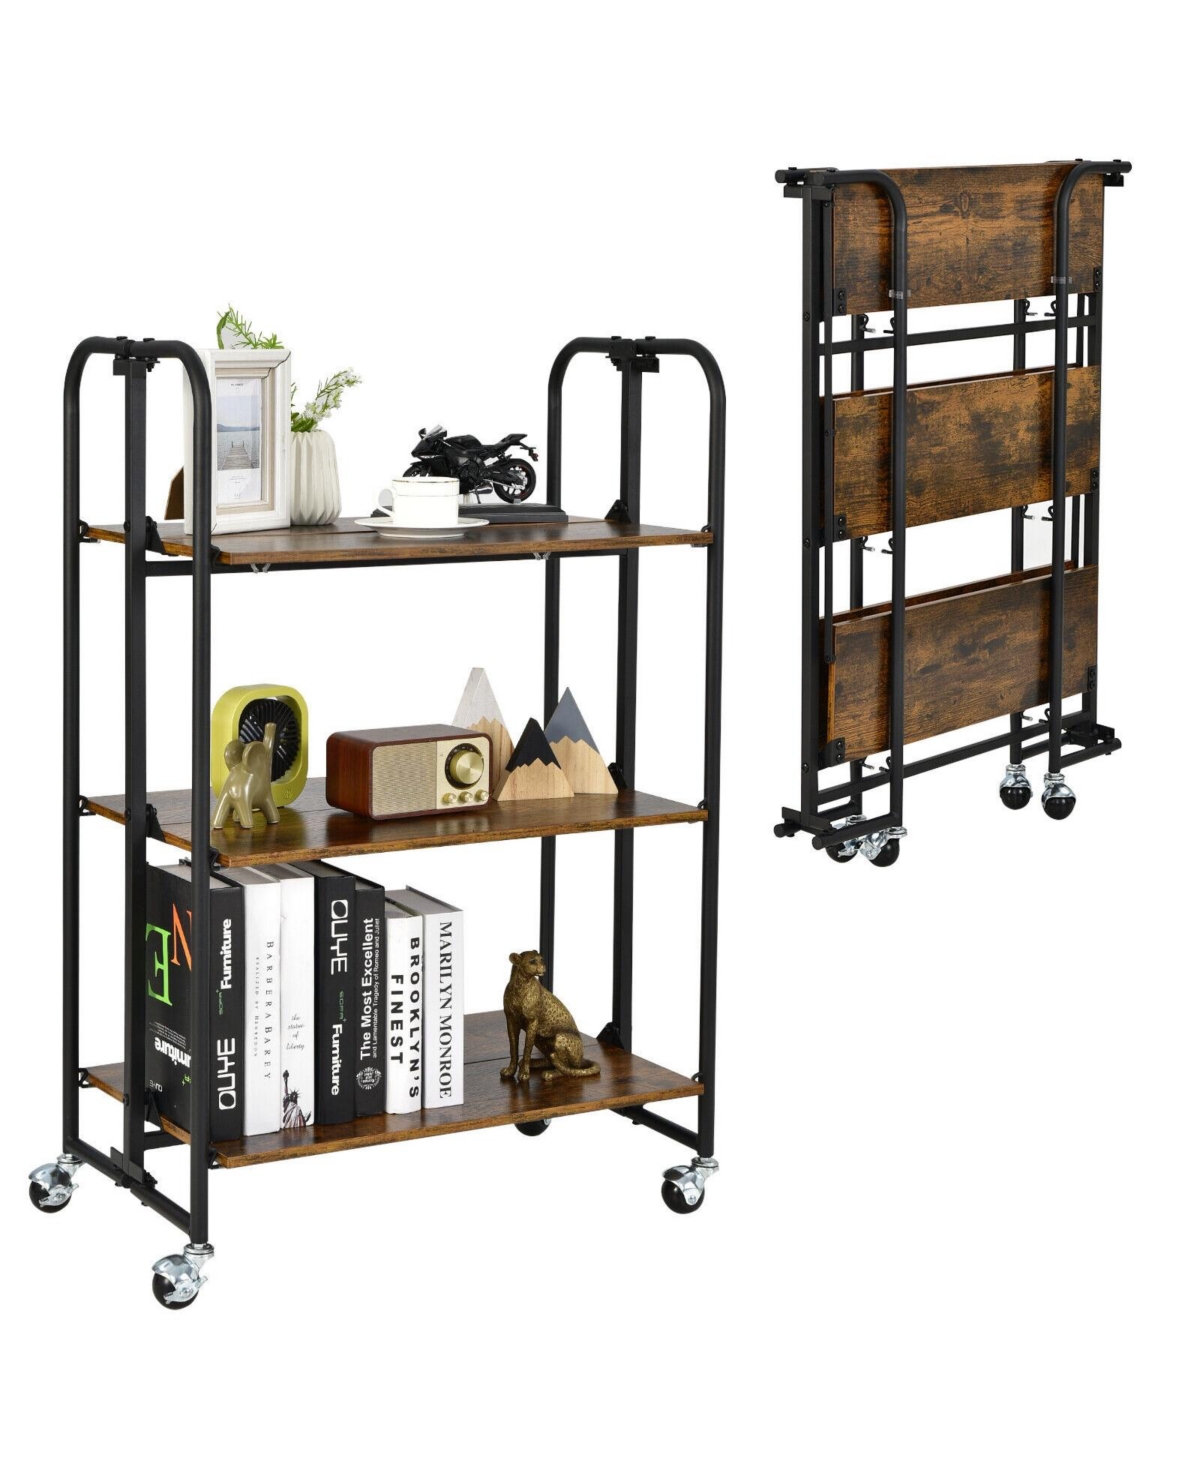 Foldable Rolling Cart with Storage Shelves for Kitchen - Brown